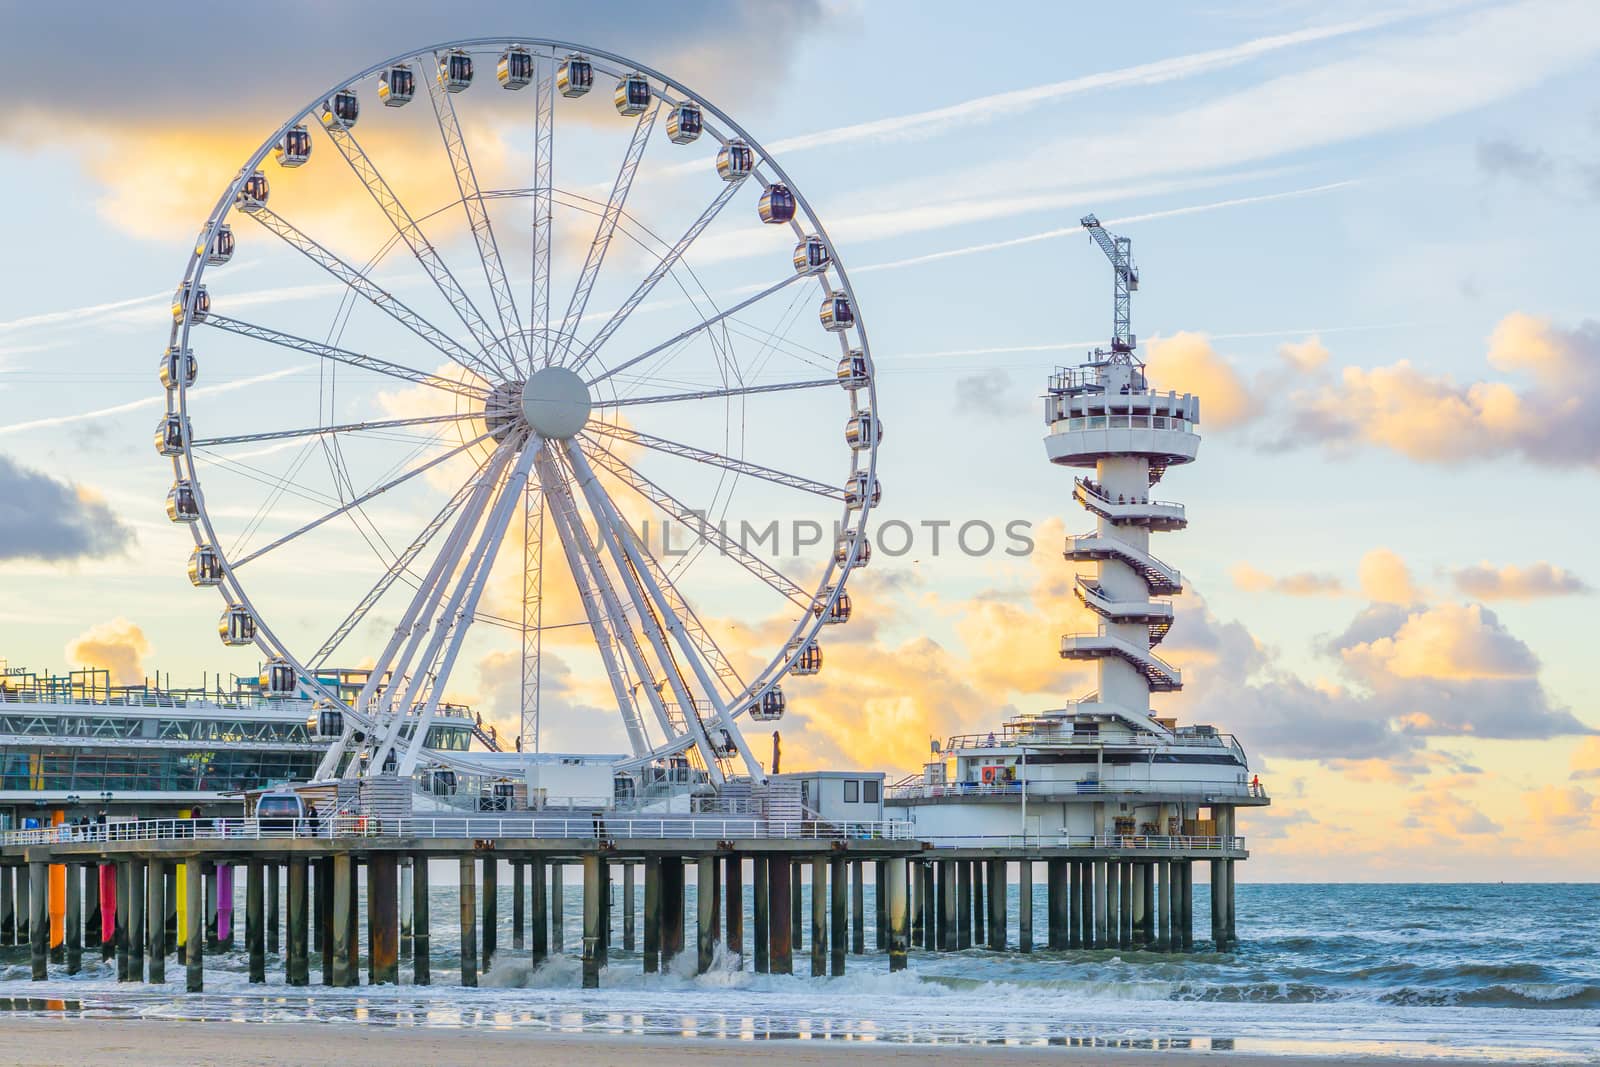 The well-known pier jetty of scheveningen beach the Netherlands with bungy jump tower and ferris wheel viewing on the ocean with waves